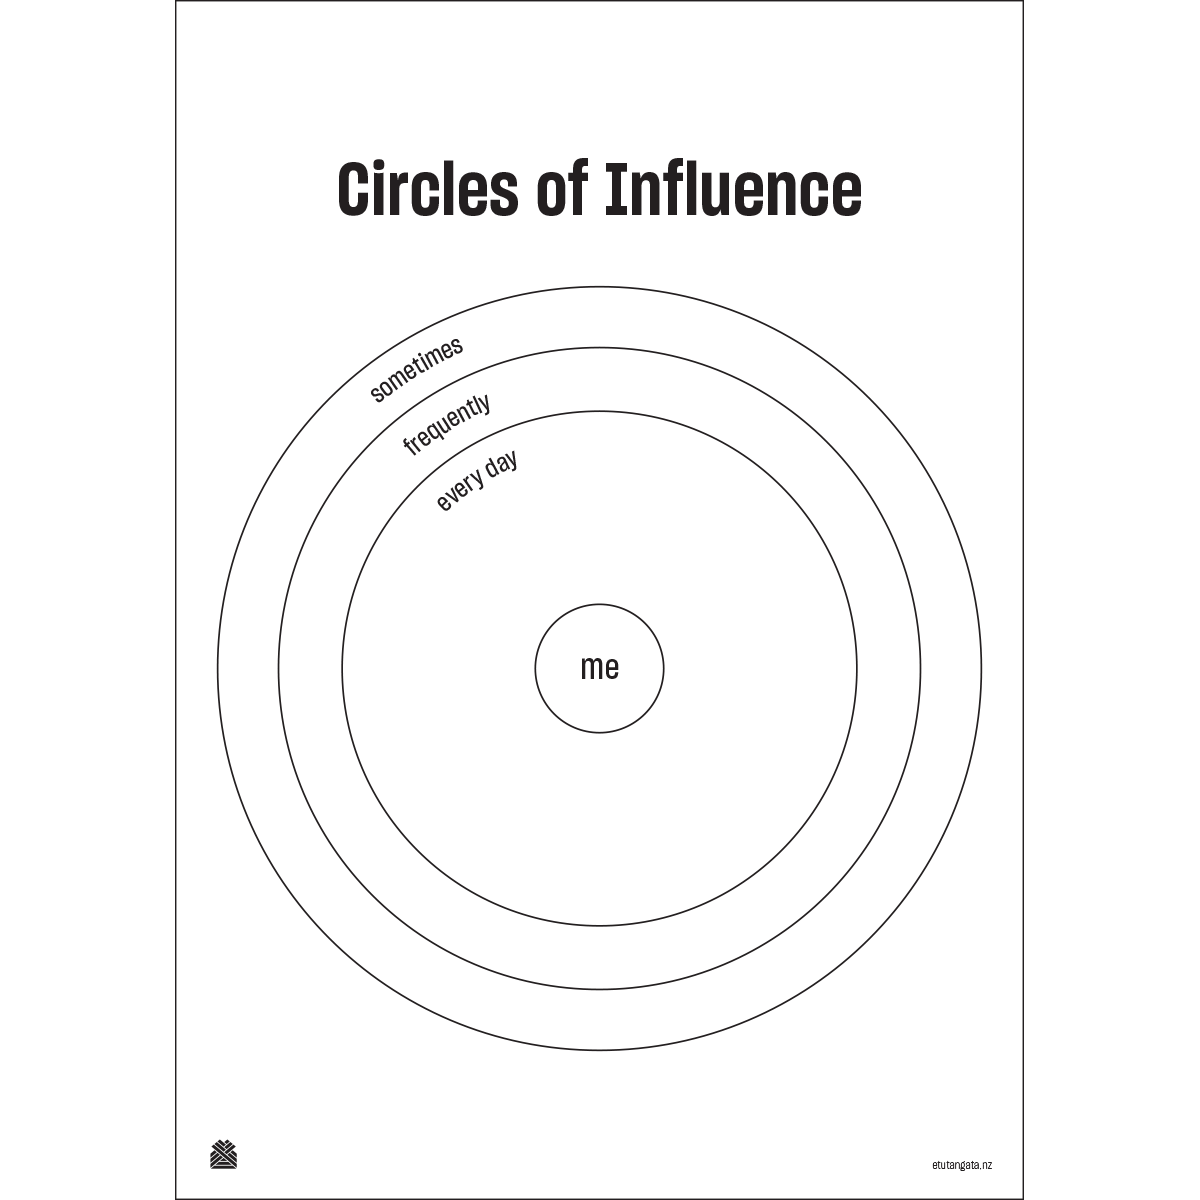 Circle of Influence Version 2